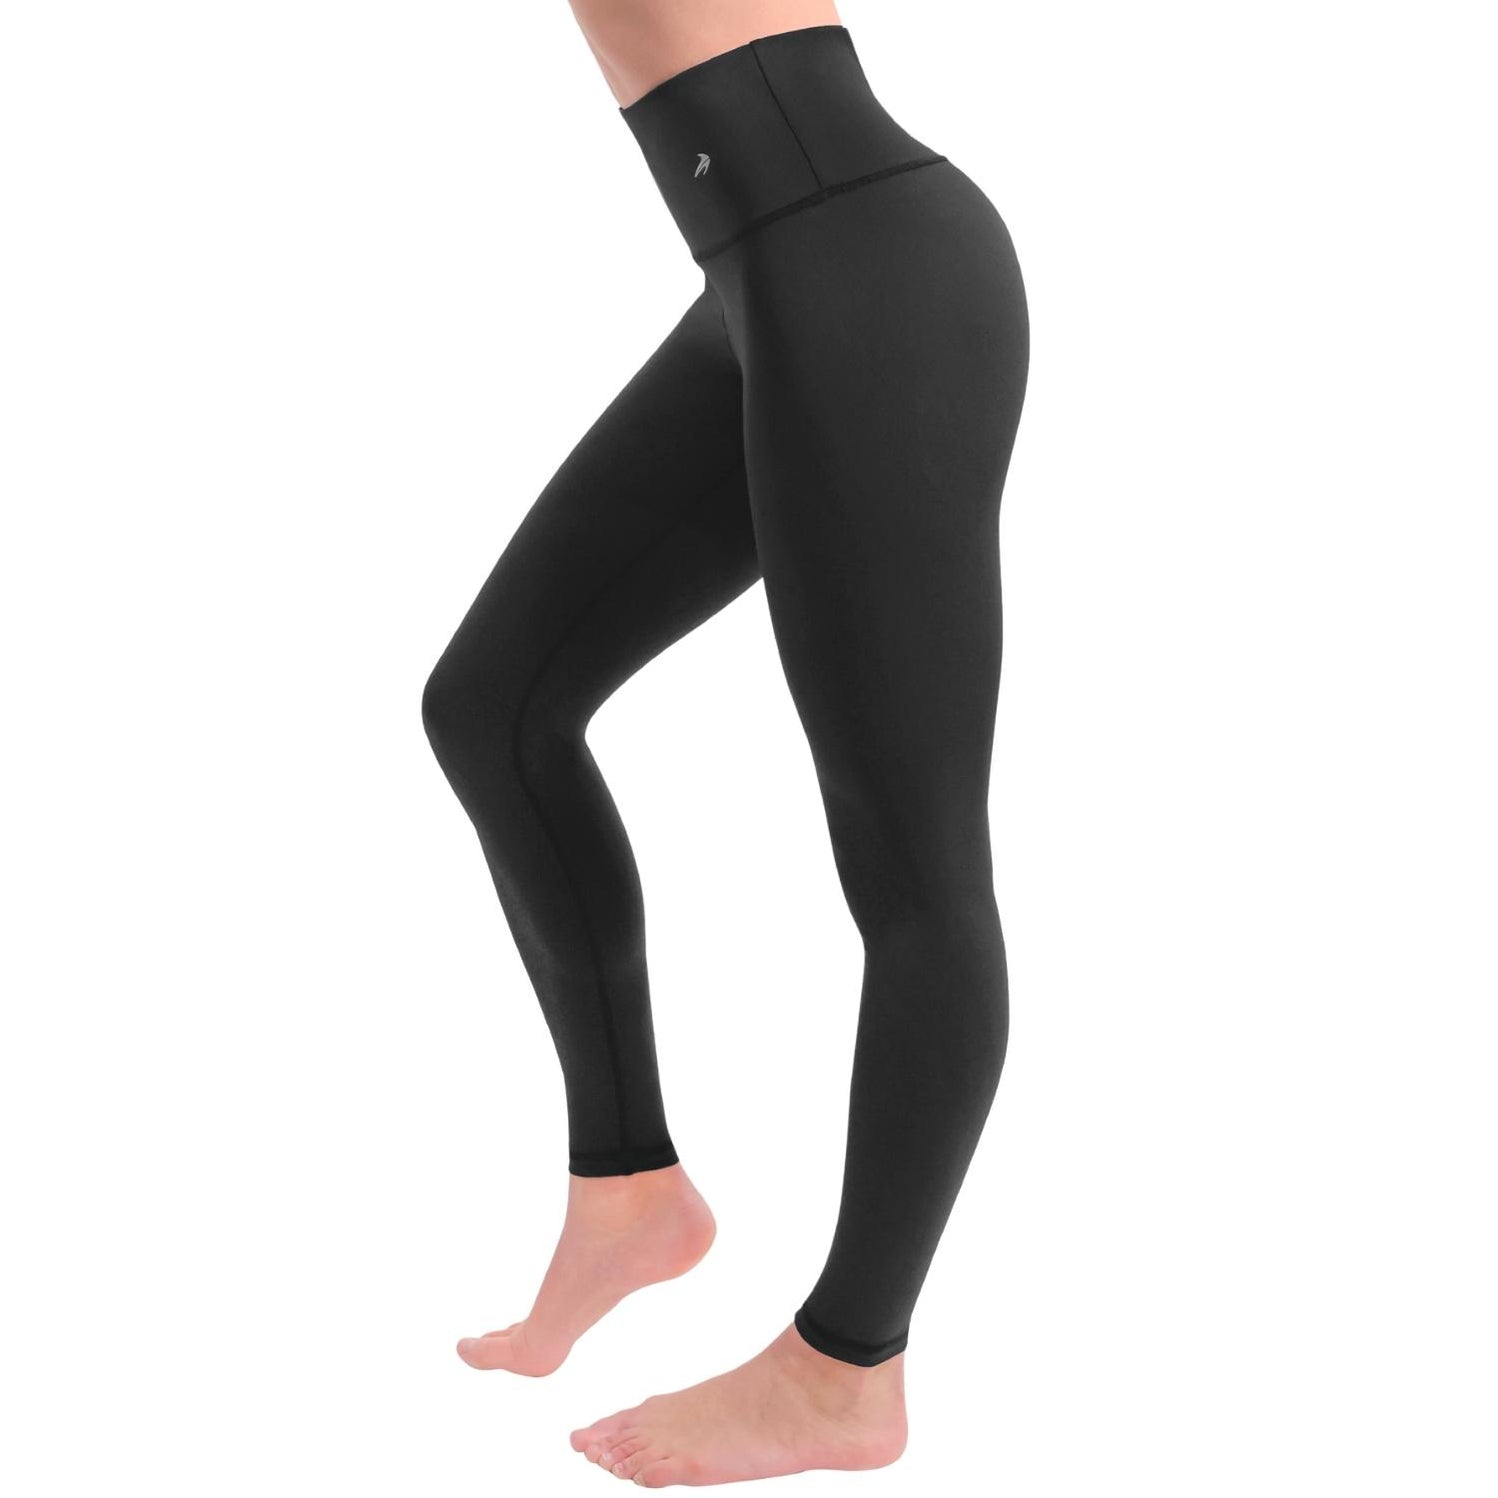 CompressionZ | Compression Clothing & Gear for Active Lifestyle